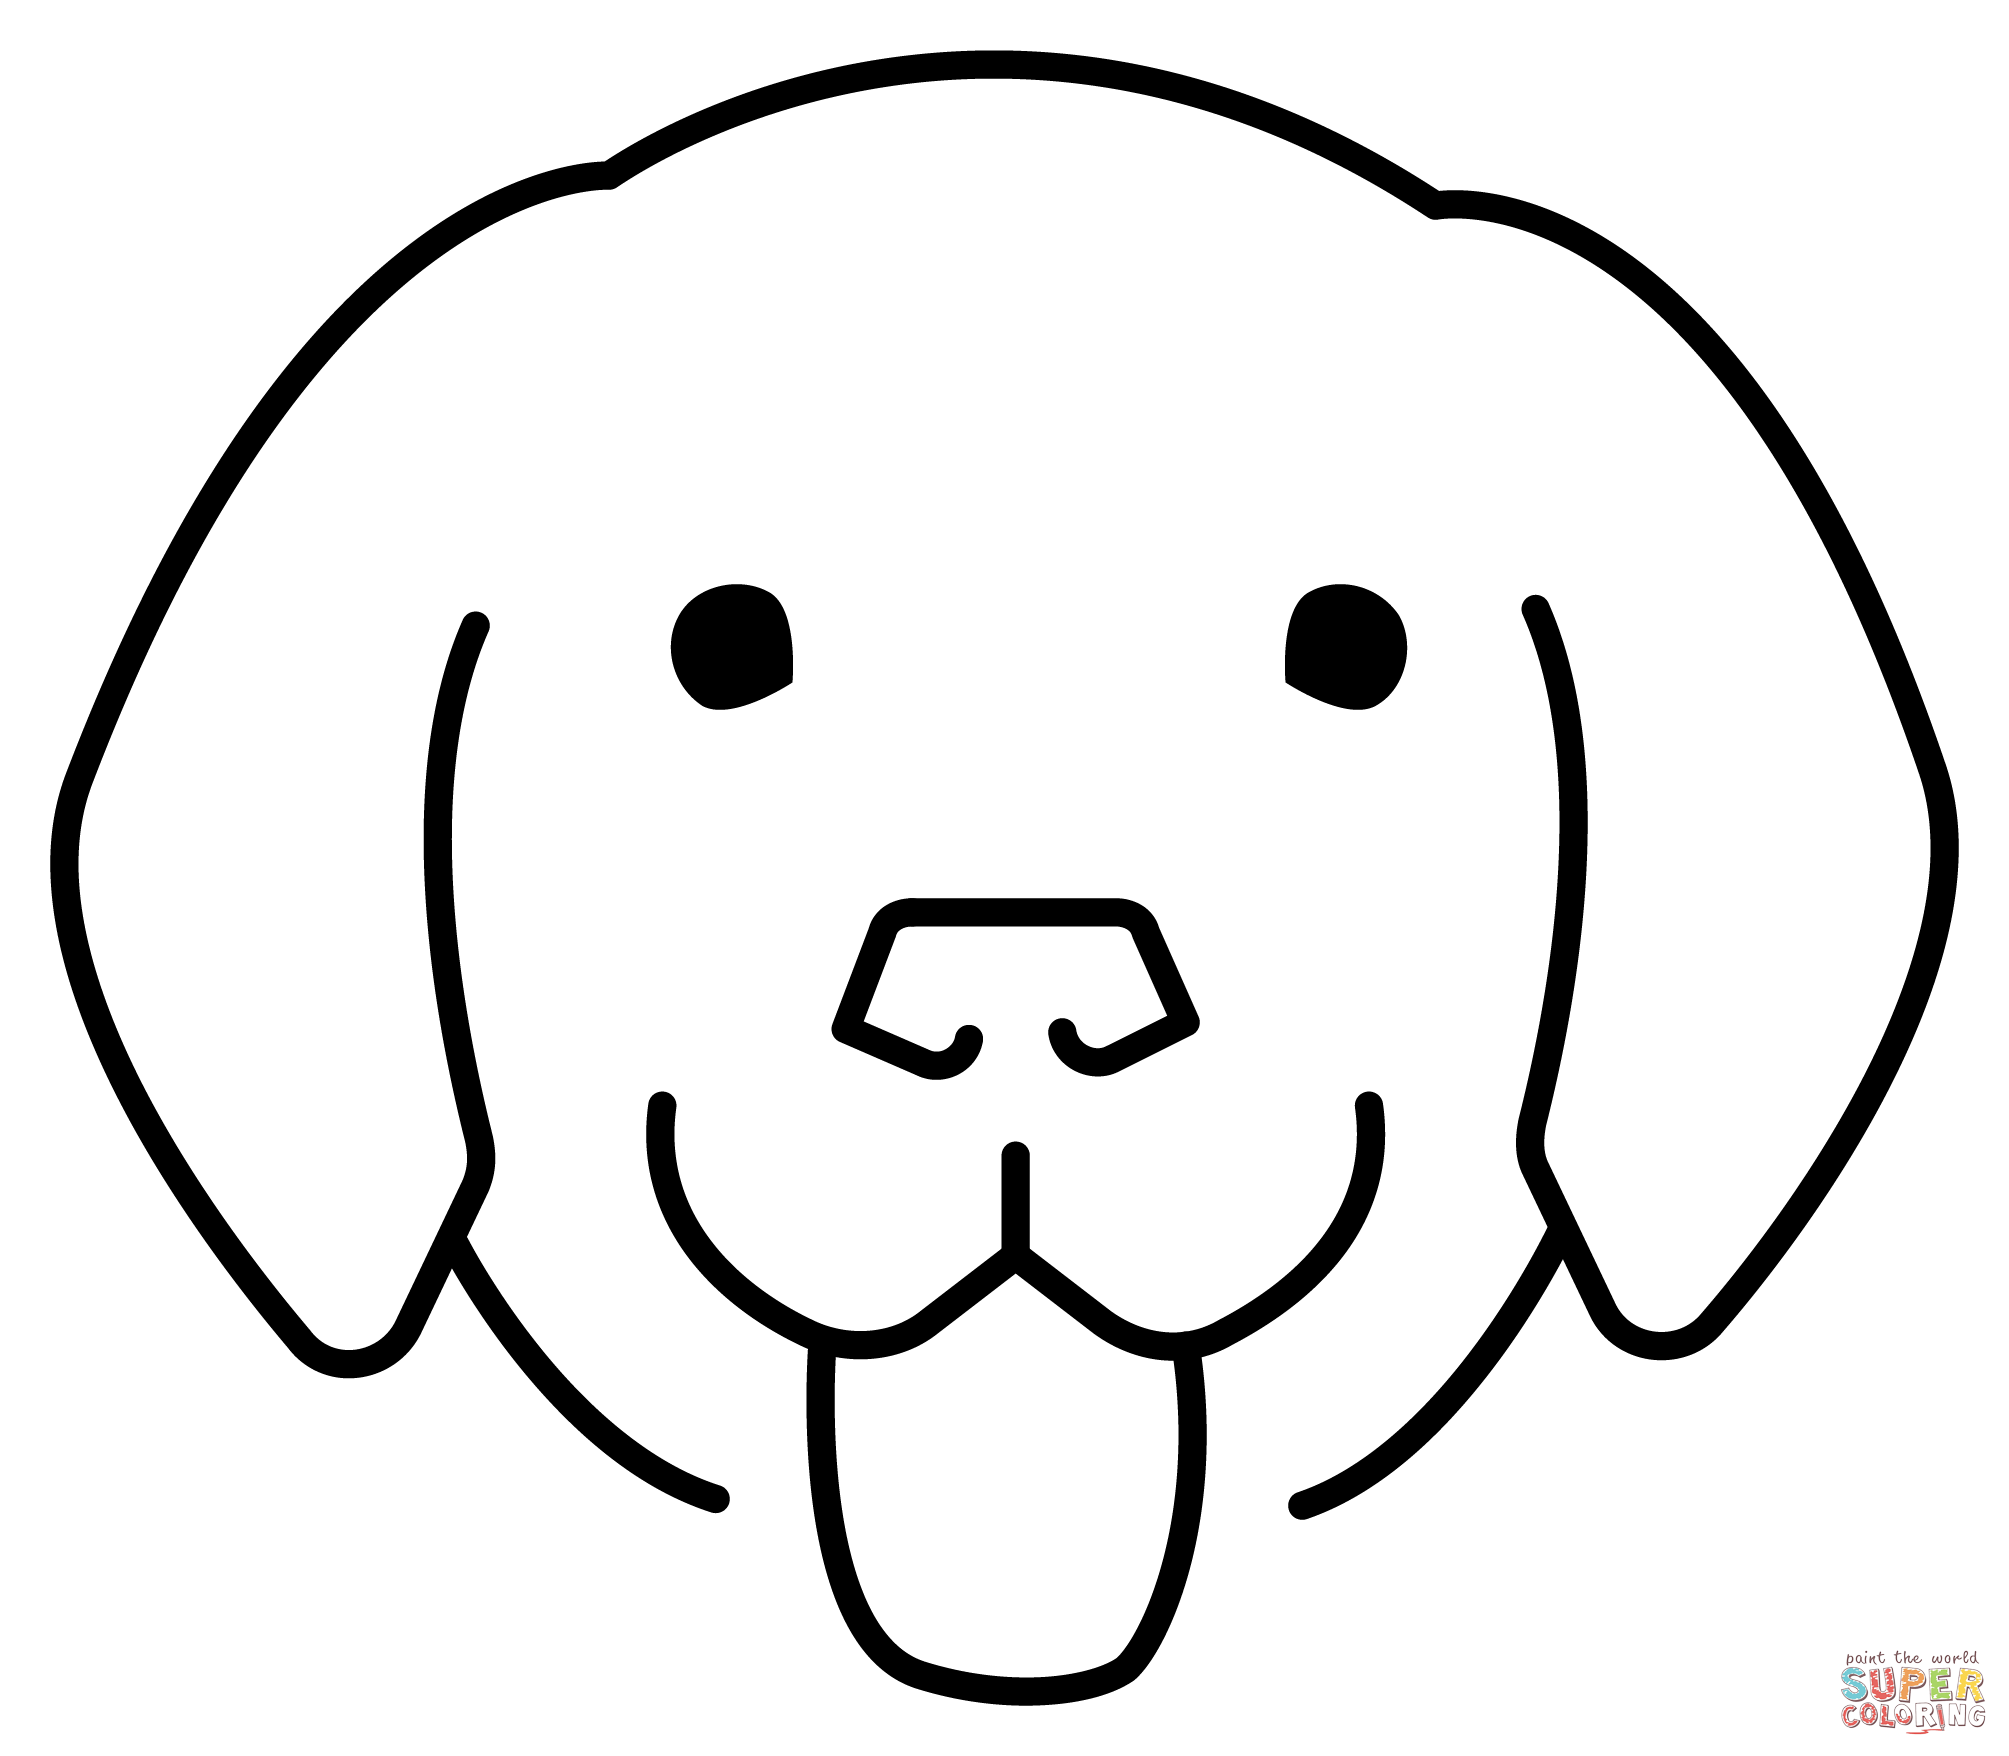 Dog face emoji coloring page free printable coloring pages